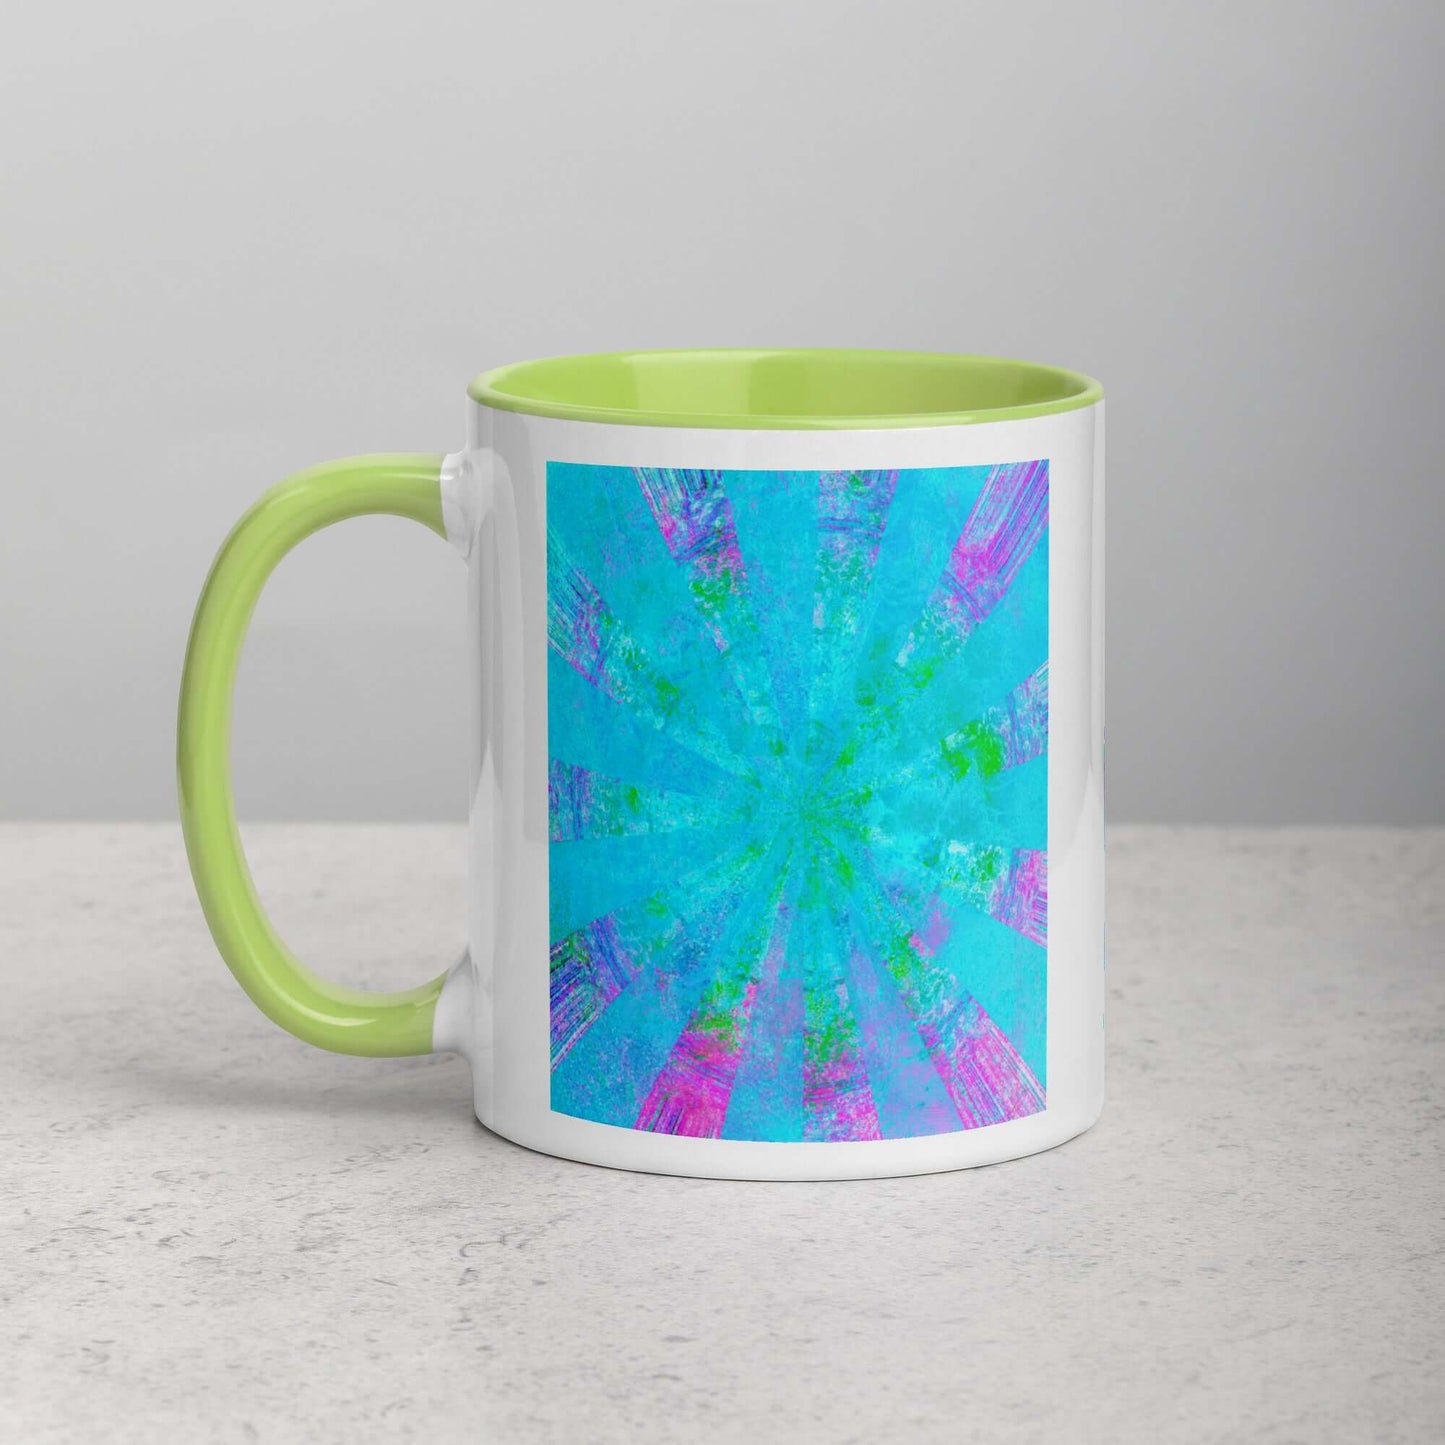 Turquoise Blue with Purple Radial “Blue Stingray” Abstract Art Mug with Lime Green Color Inside Left Handed Front View